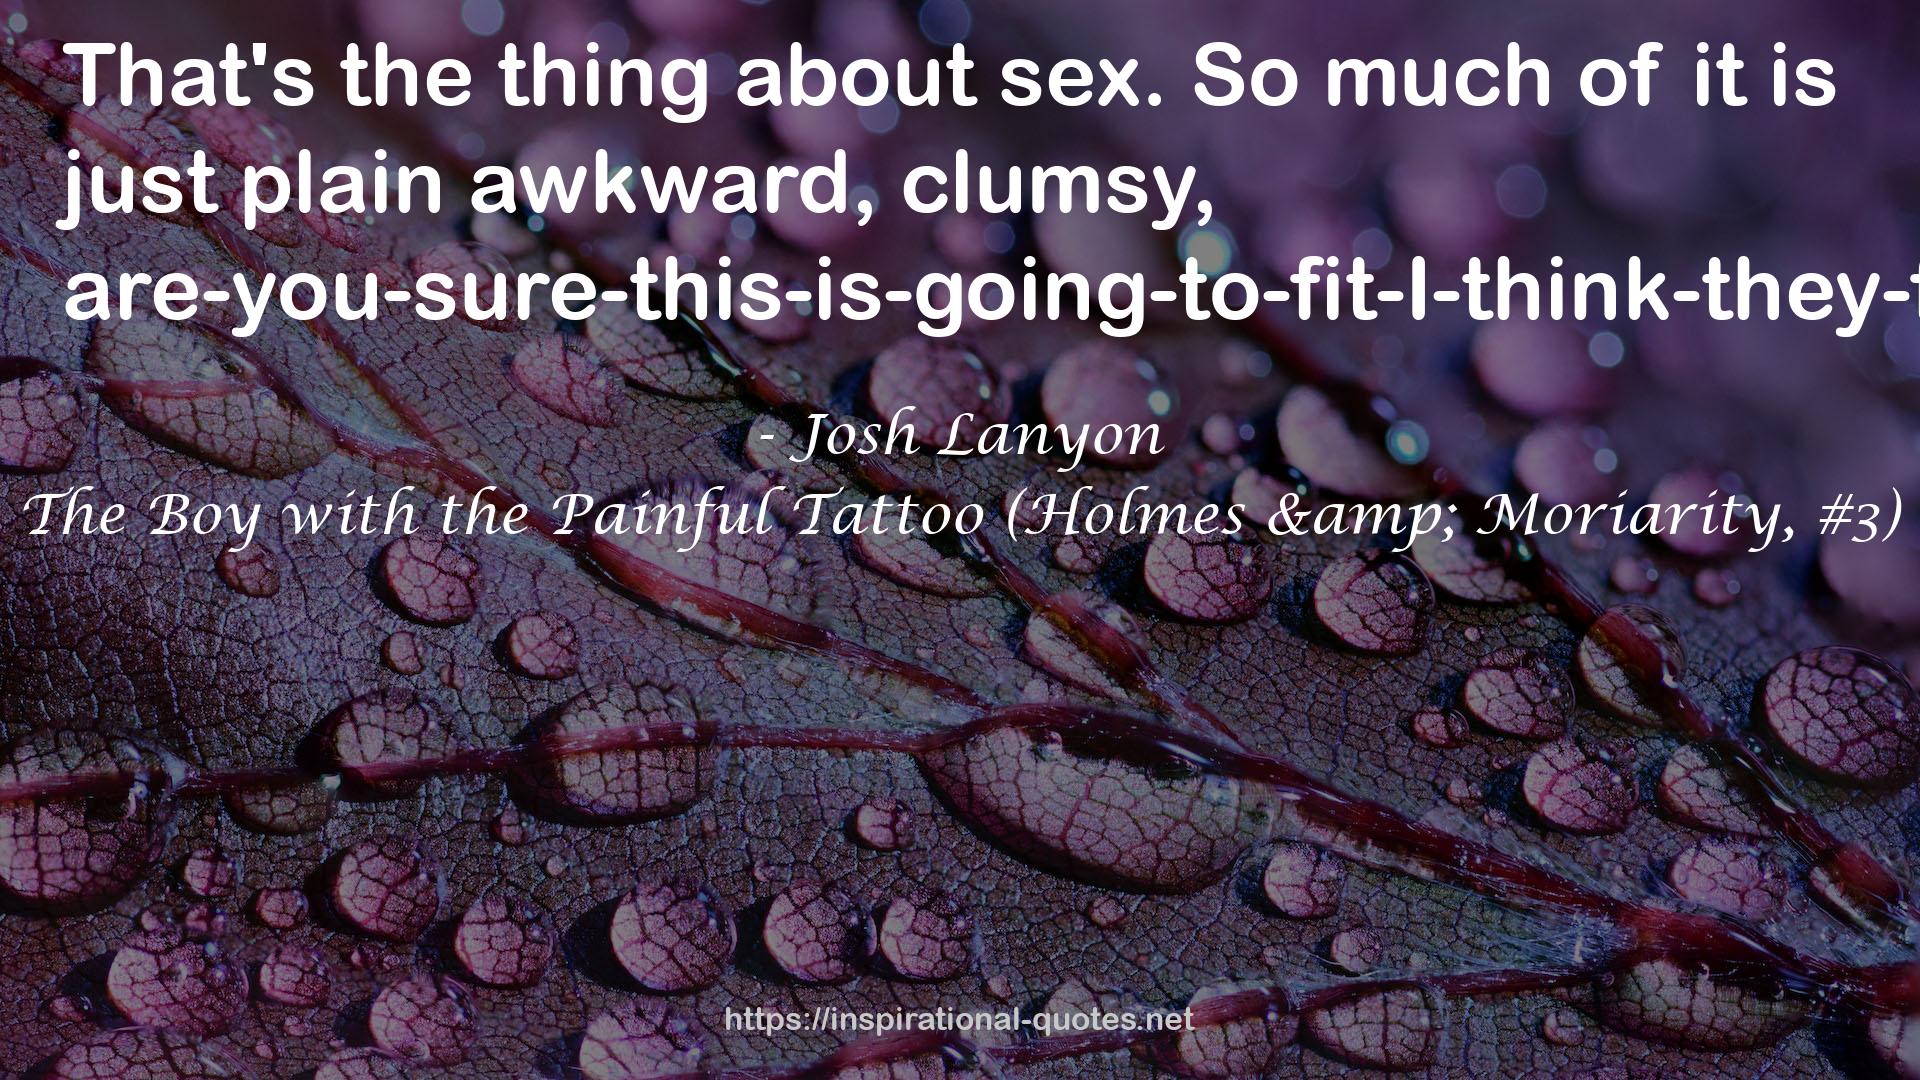 The Boy with the Painful Tattoo (Holmes & Moriarity, #3) QUOTES